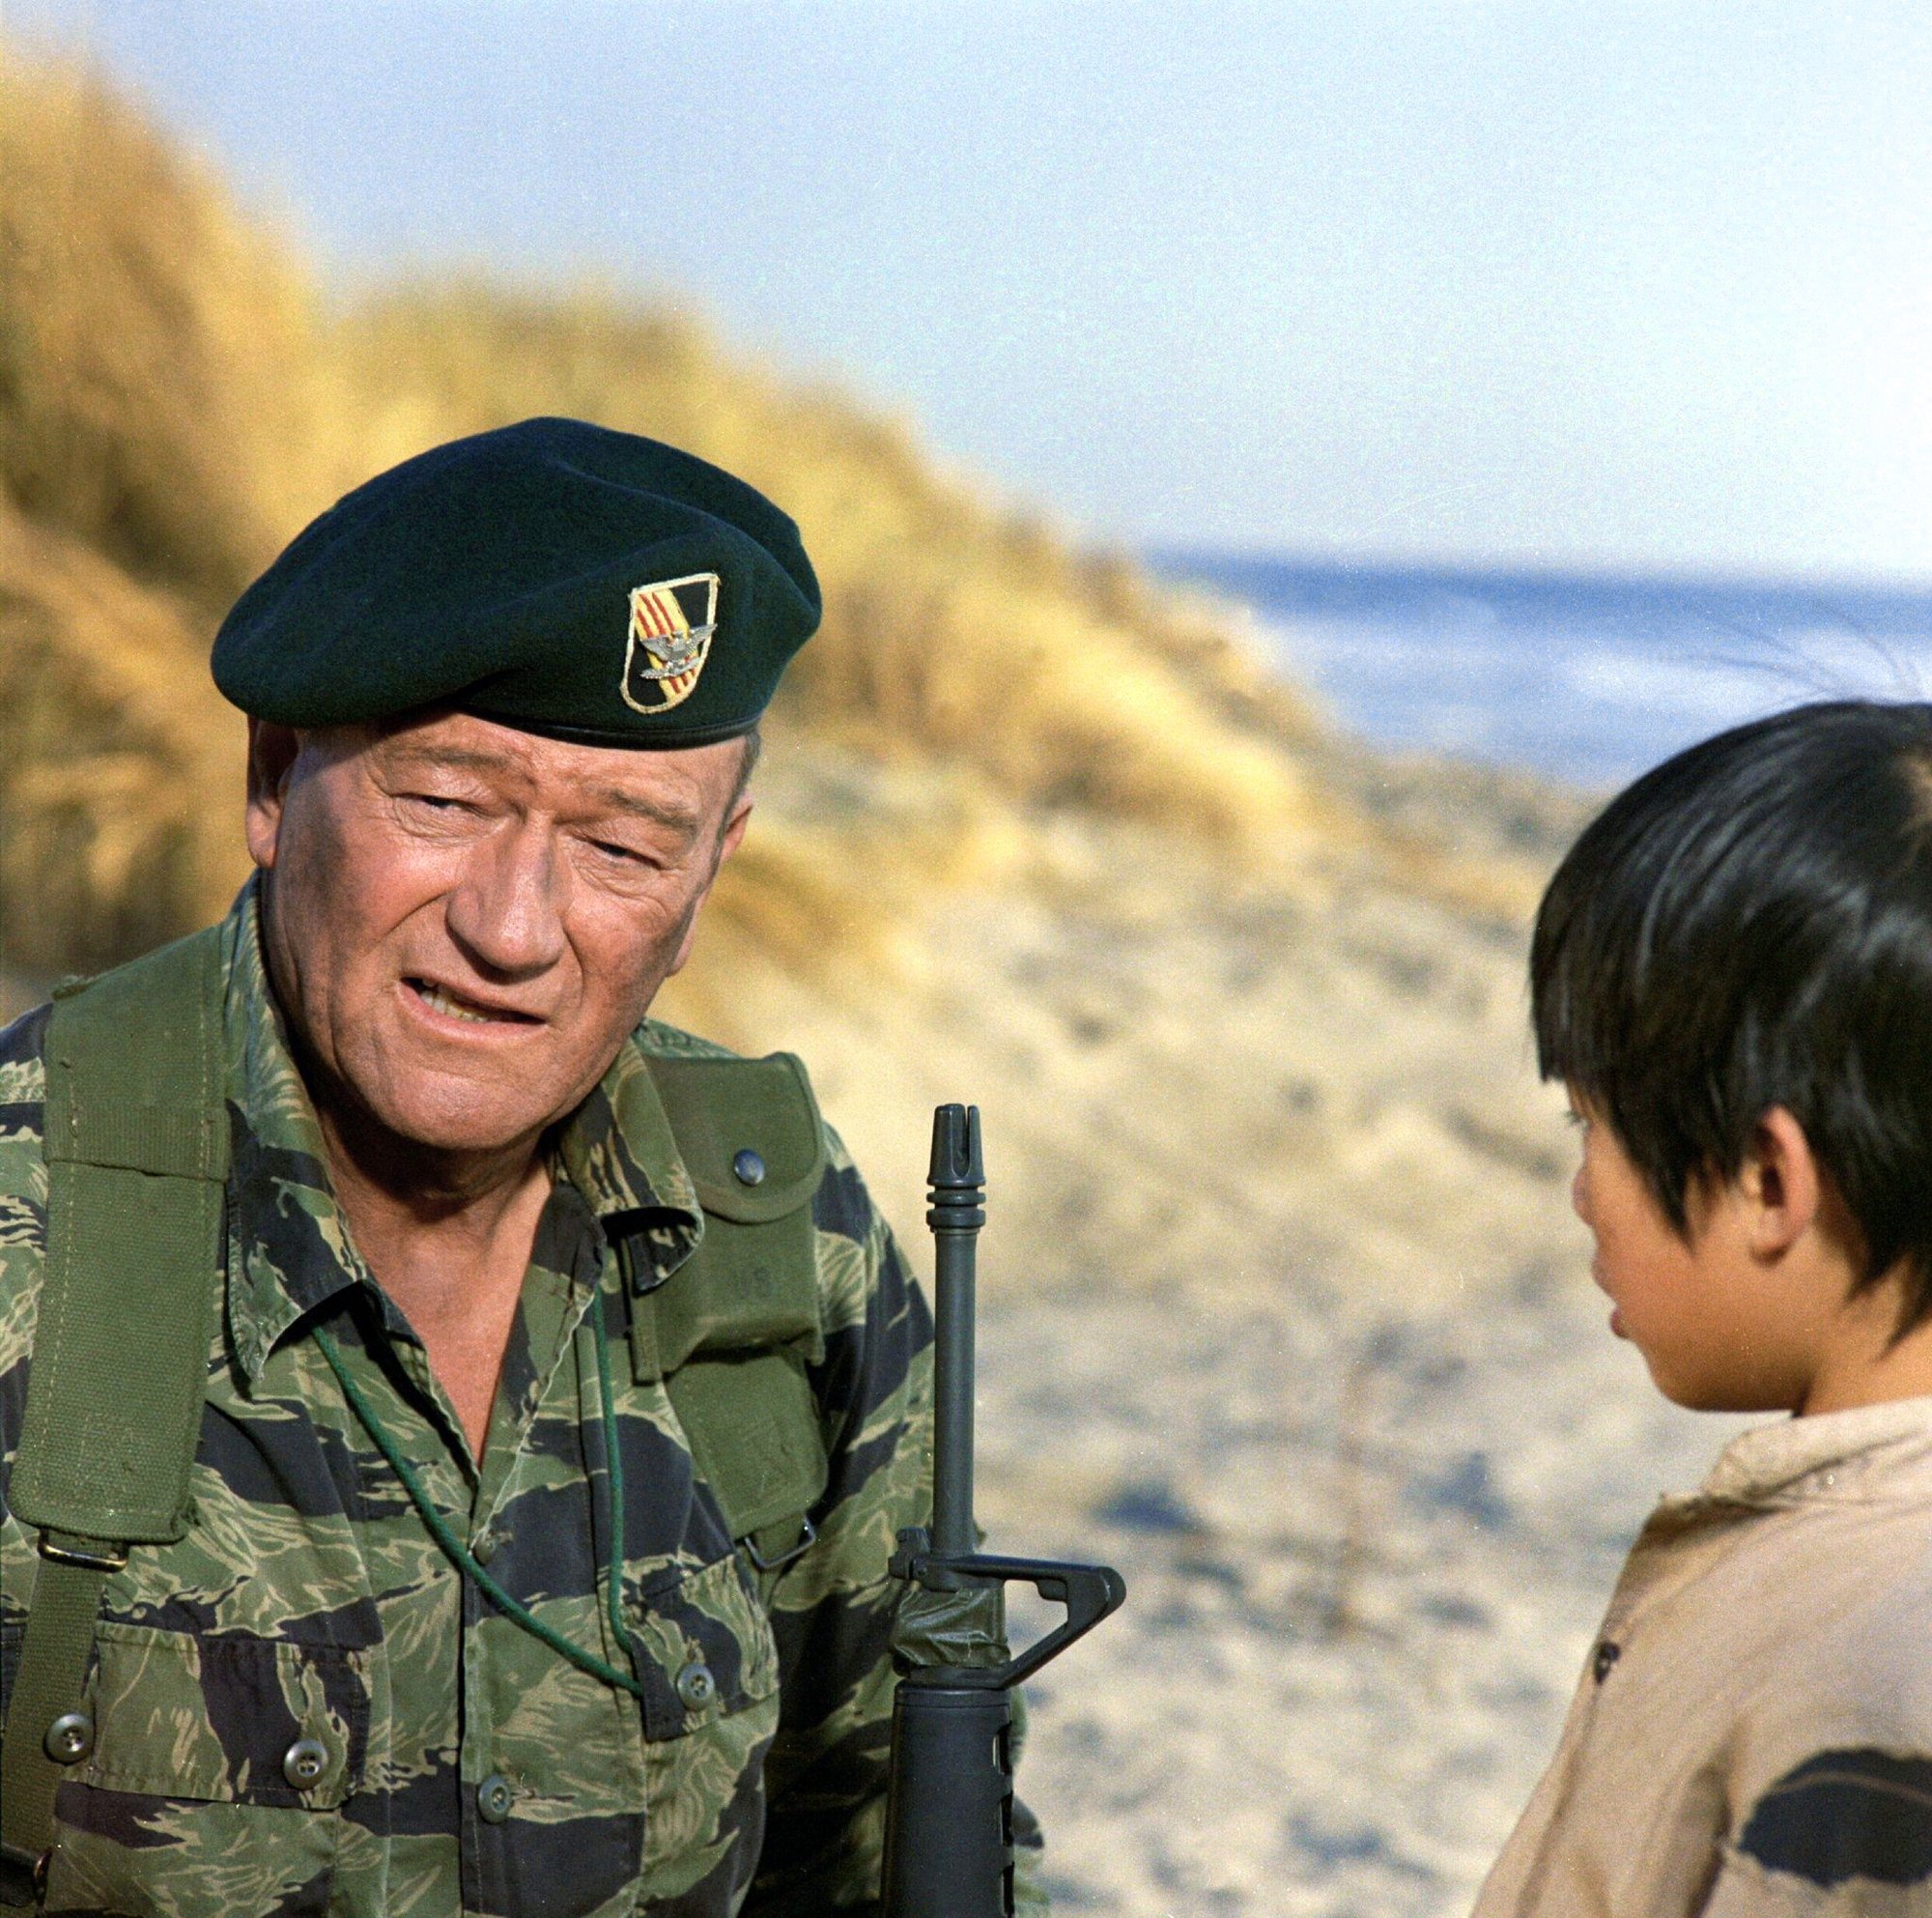 John Wayne as Col. Mike Kirby in 'The Green Berets' in a military uniform holding a gun